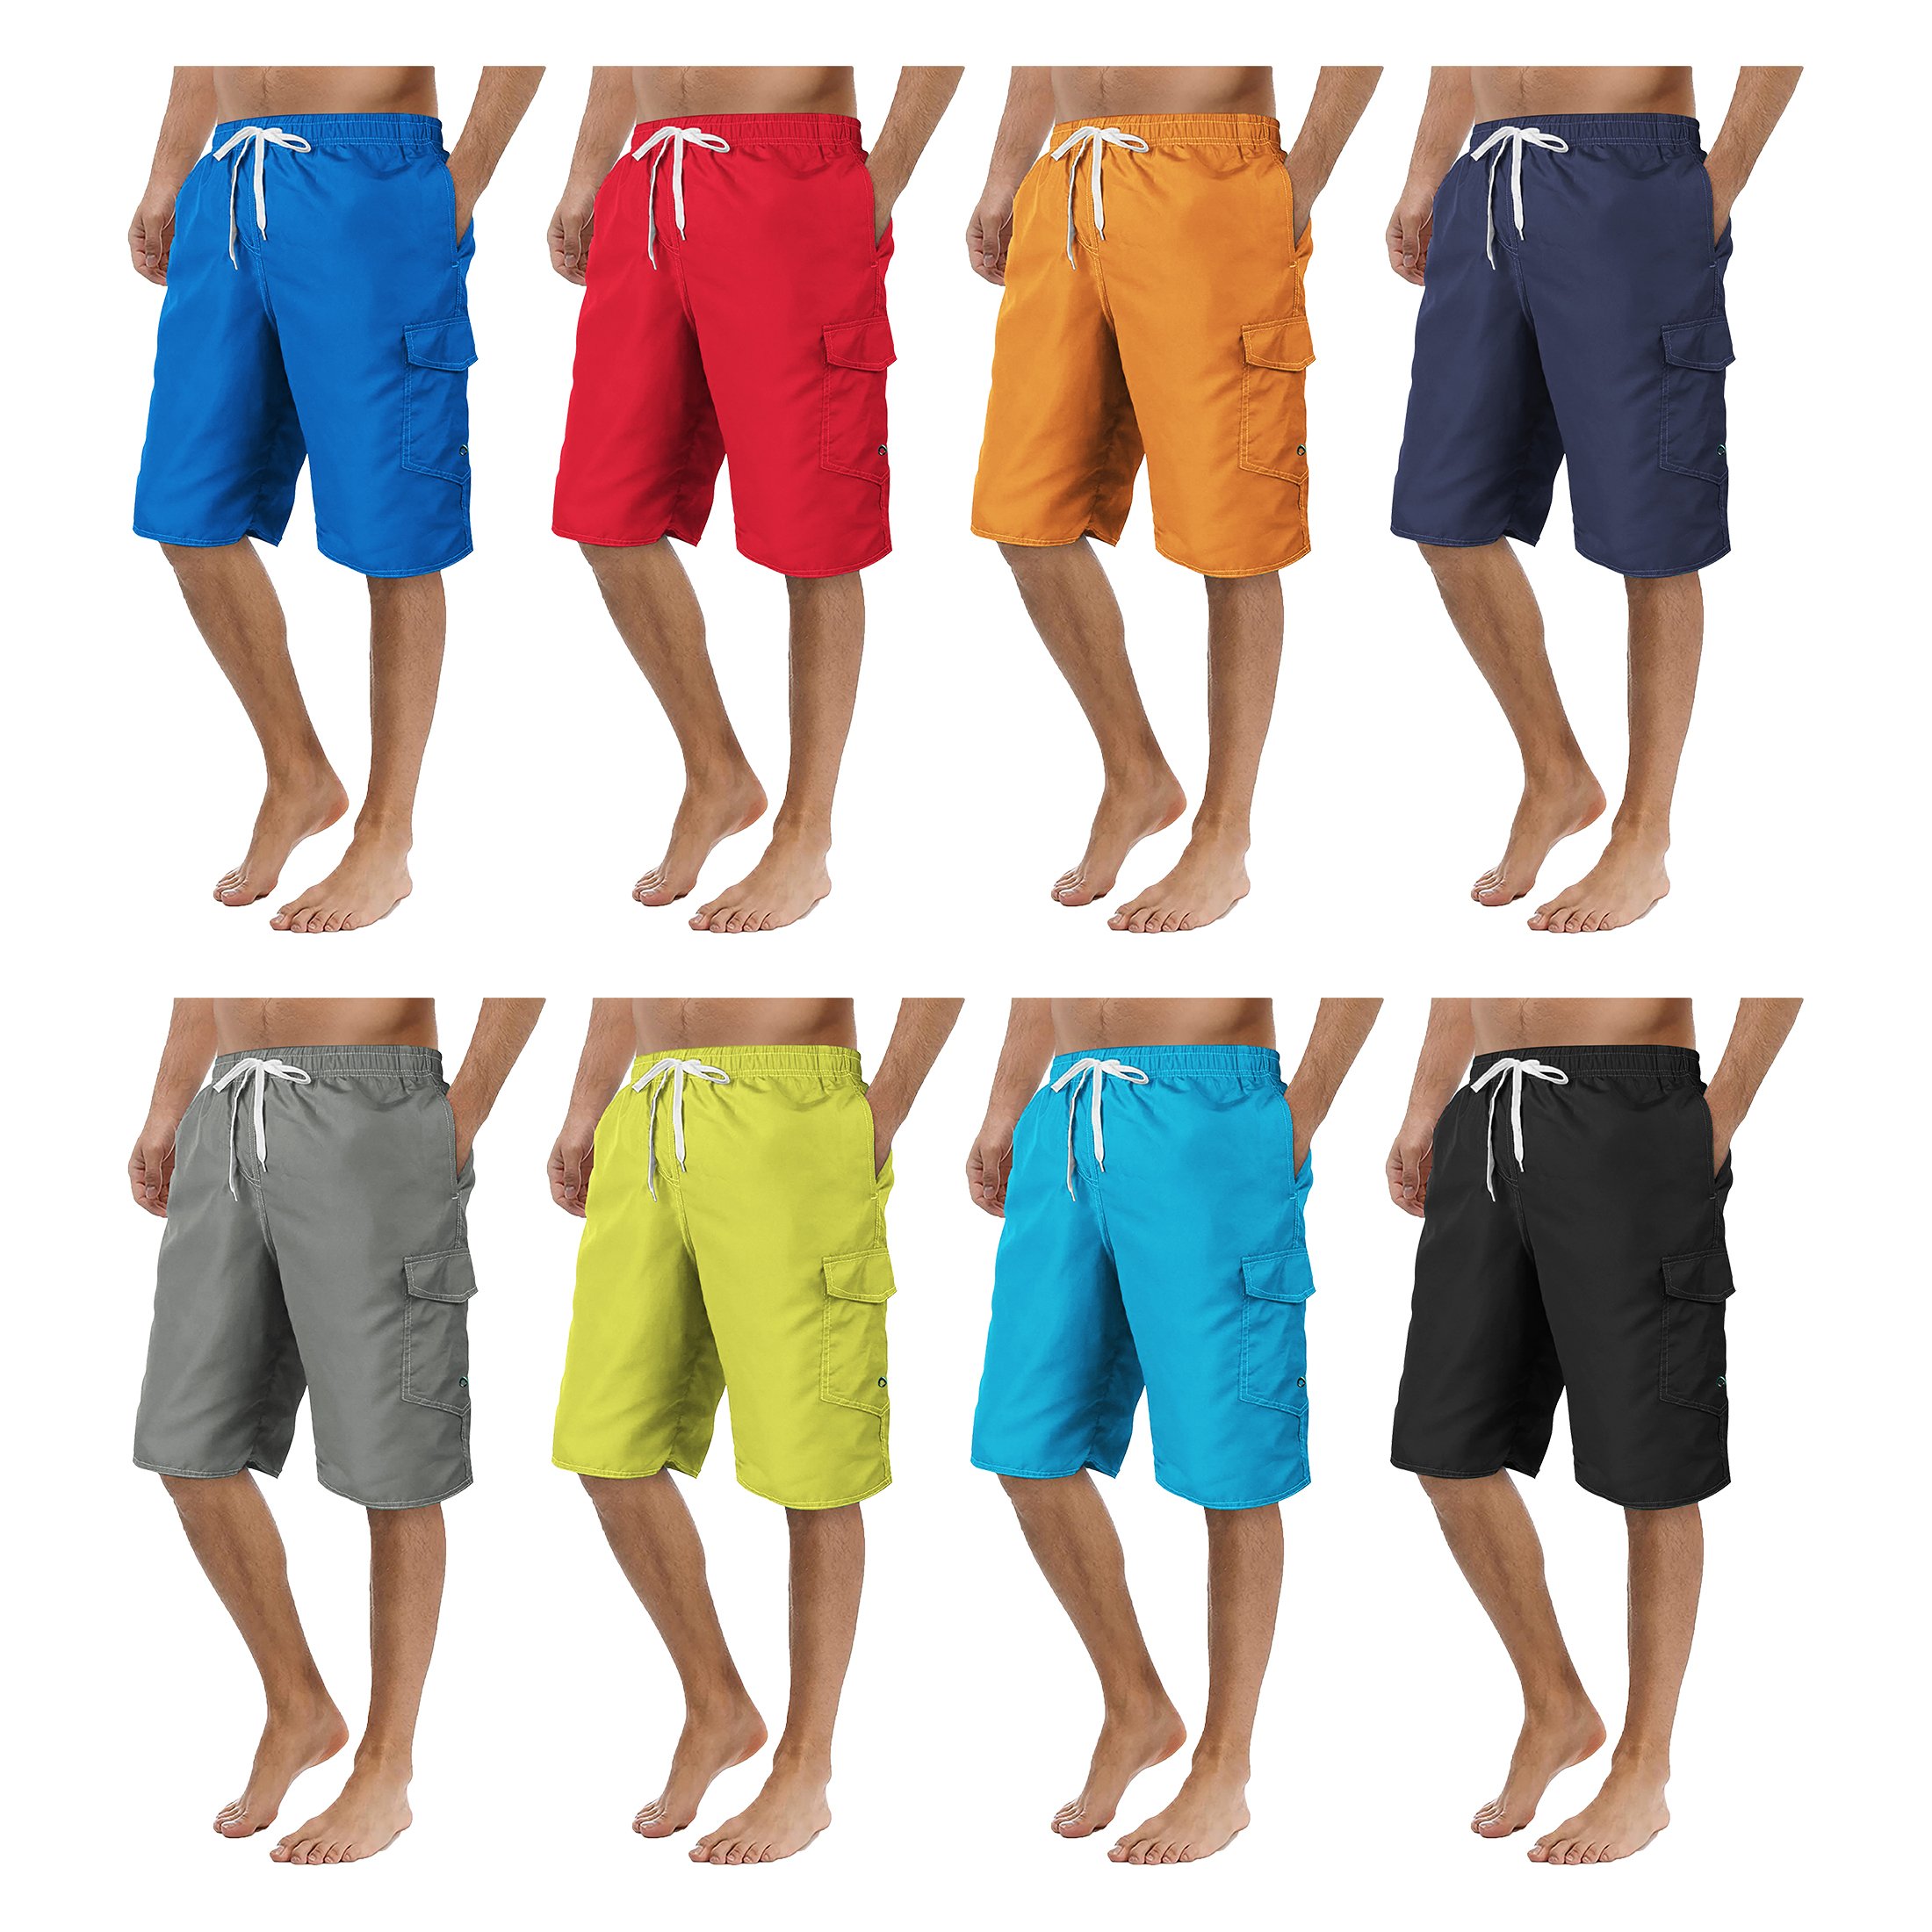 4-Pack Men's Quick Dry Cargo Swim Trunks Beachwear Bathing Suits With Pockets Solid Flex Board Shorts - S